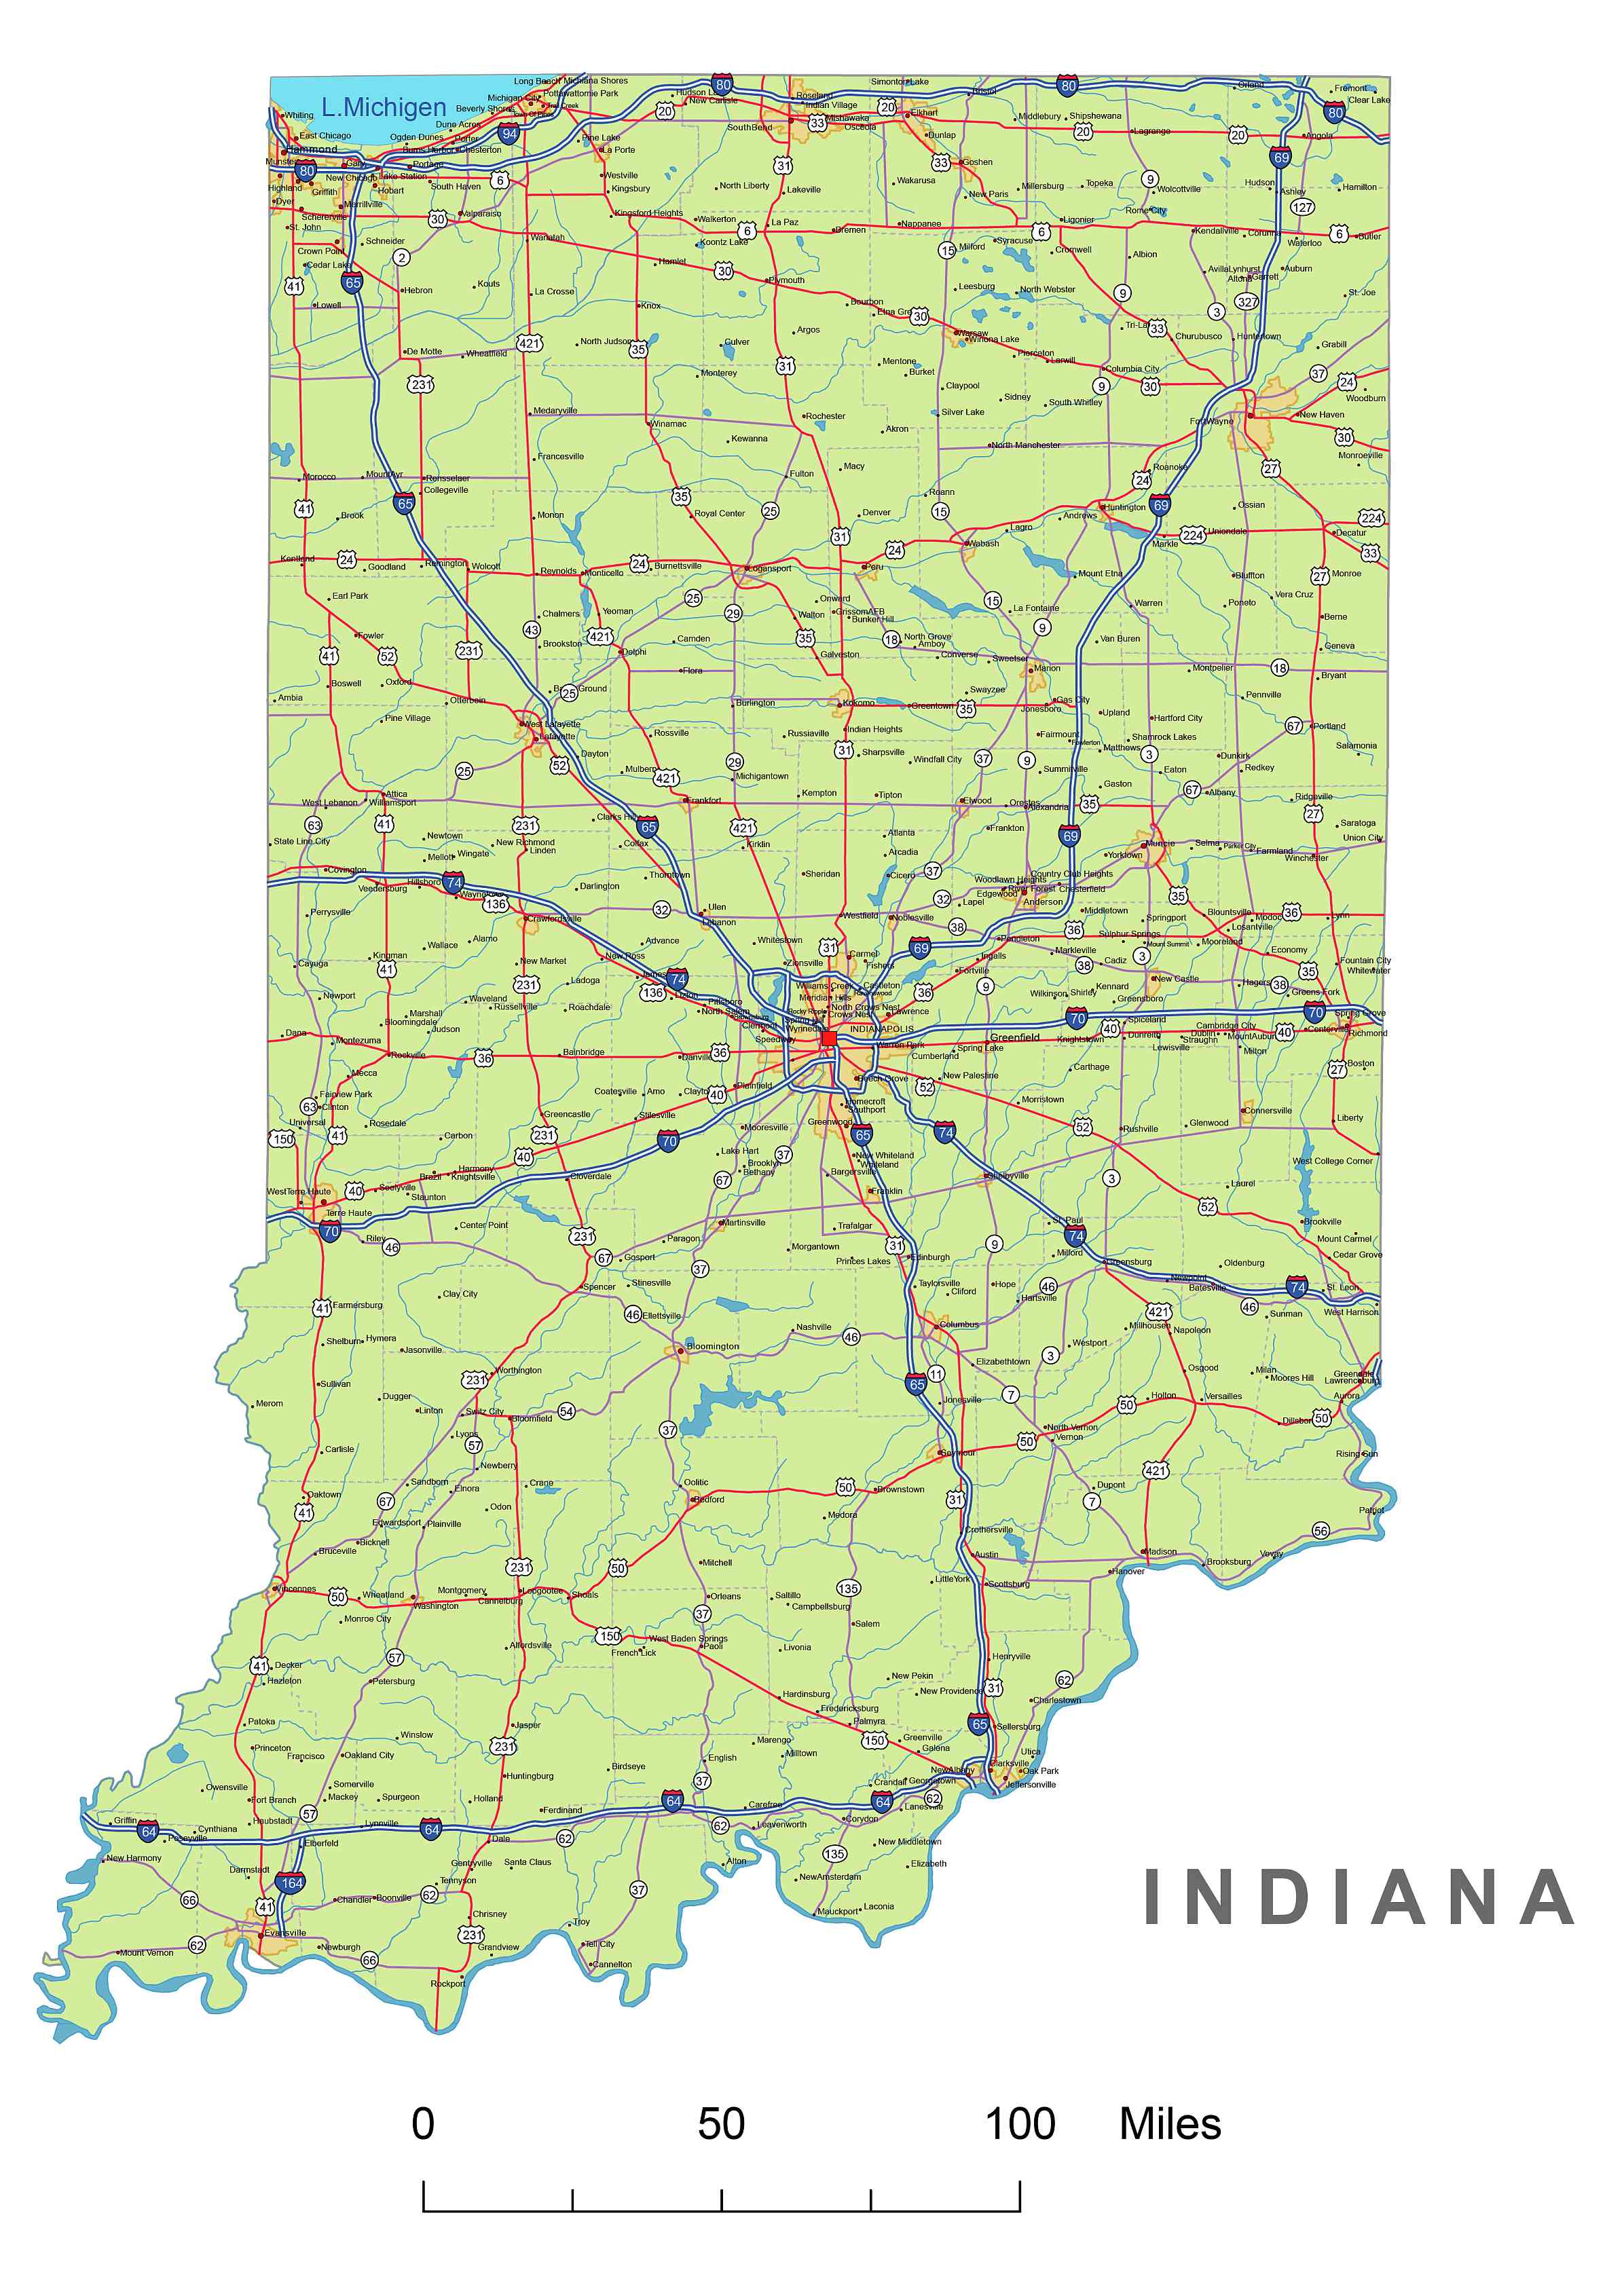 Preview of Indiana State vector road map.